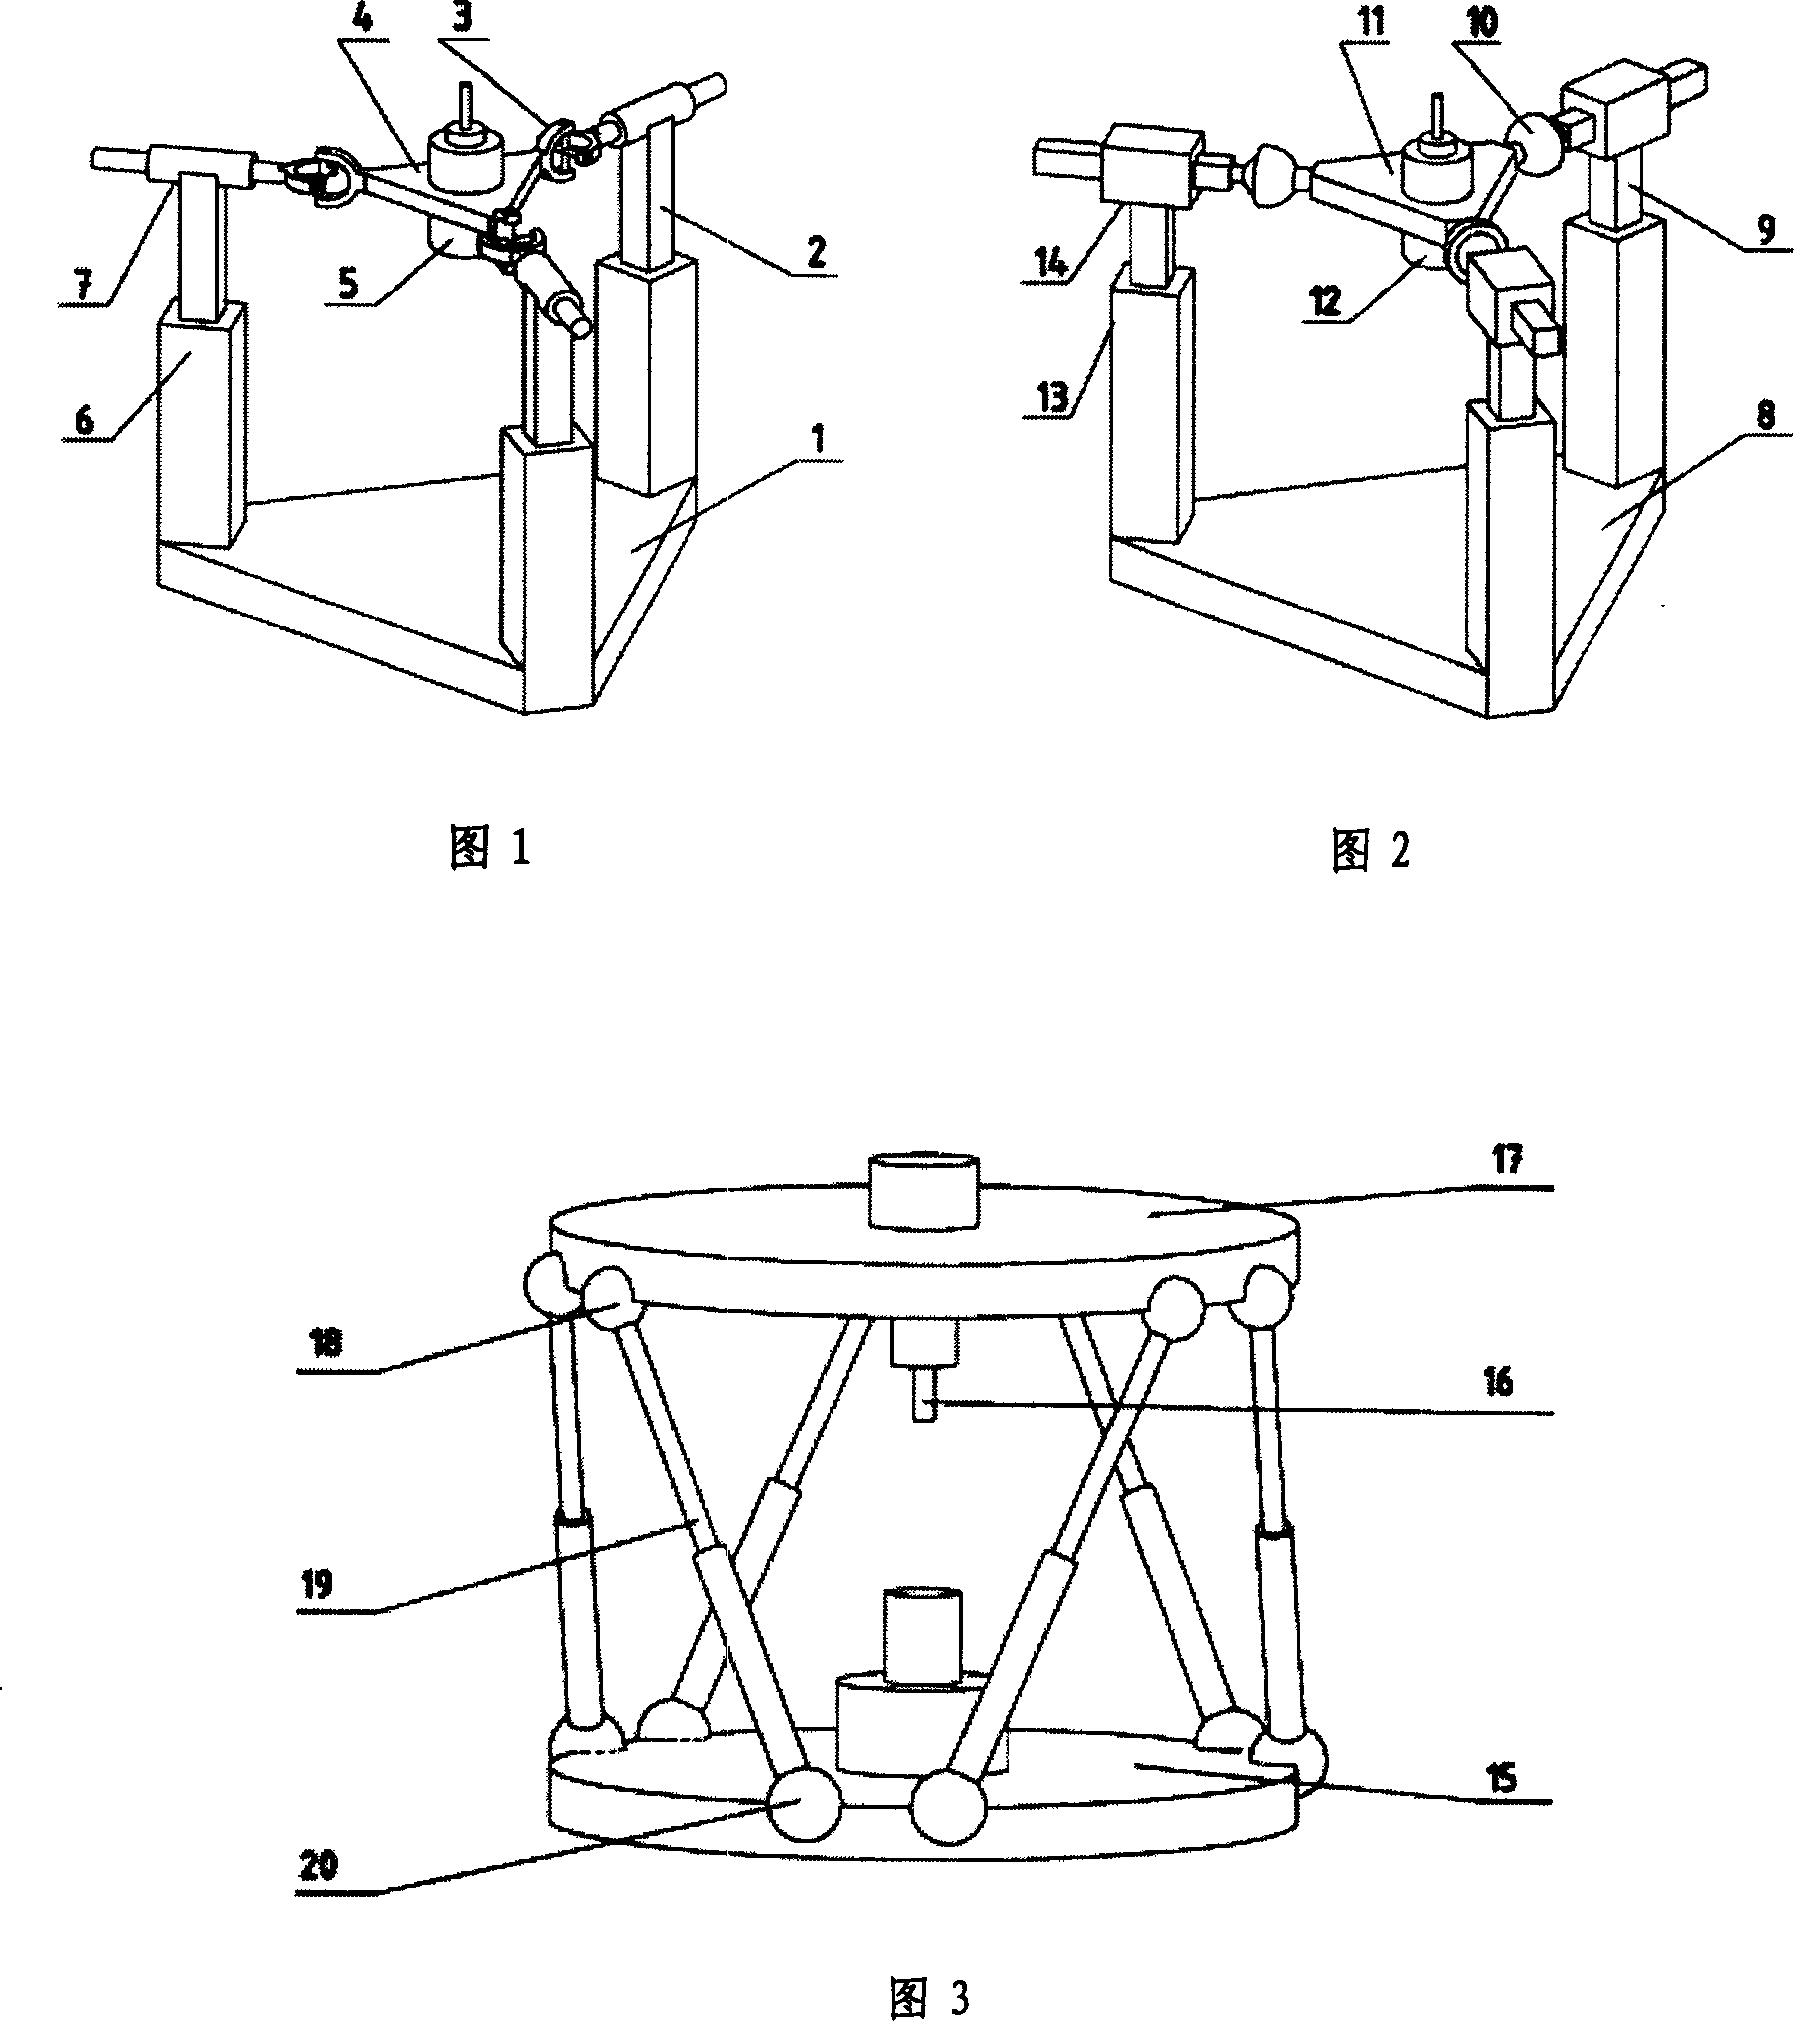 Parallel triaxial main axle journal structure